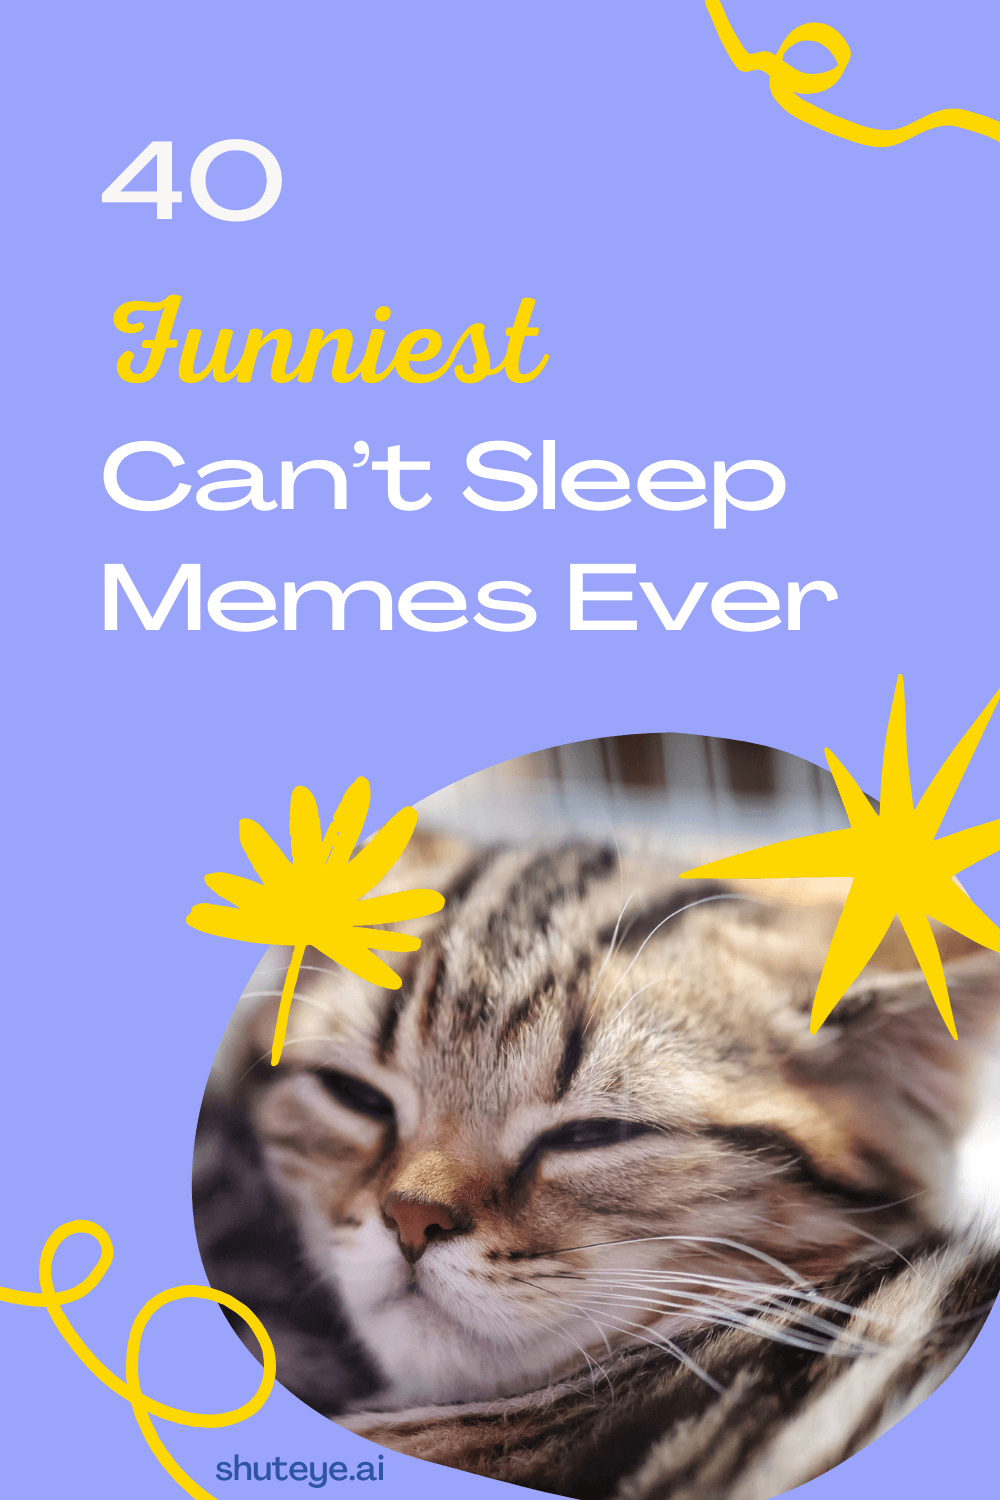 40 of the Funniest Can't Sleep Memes Ever